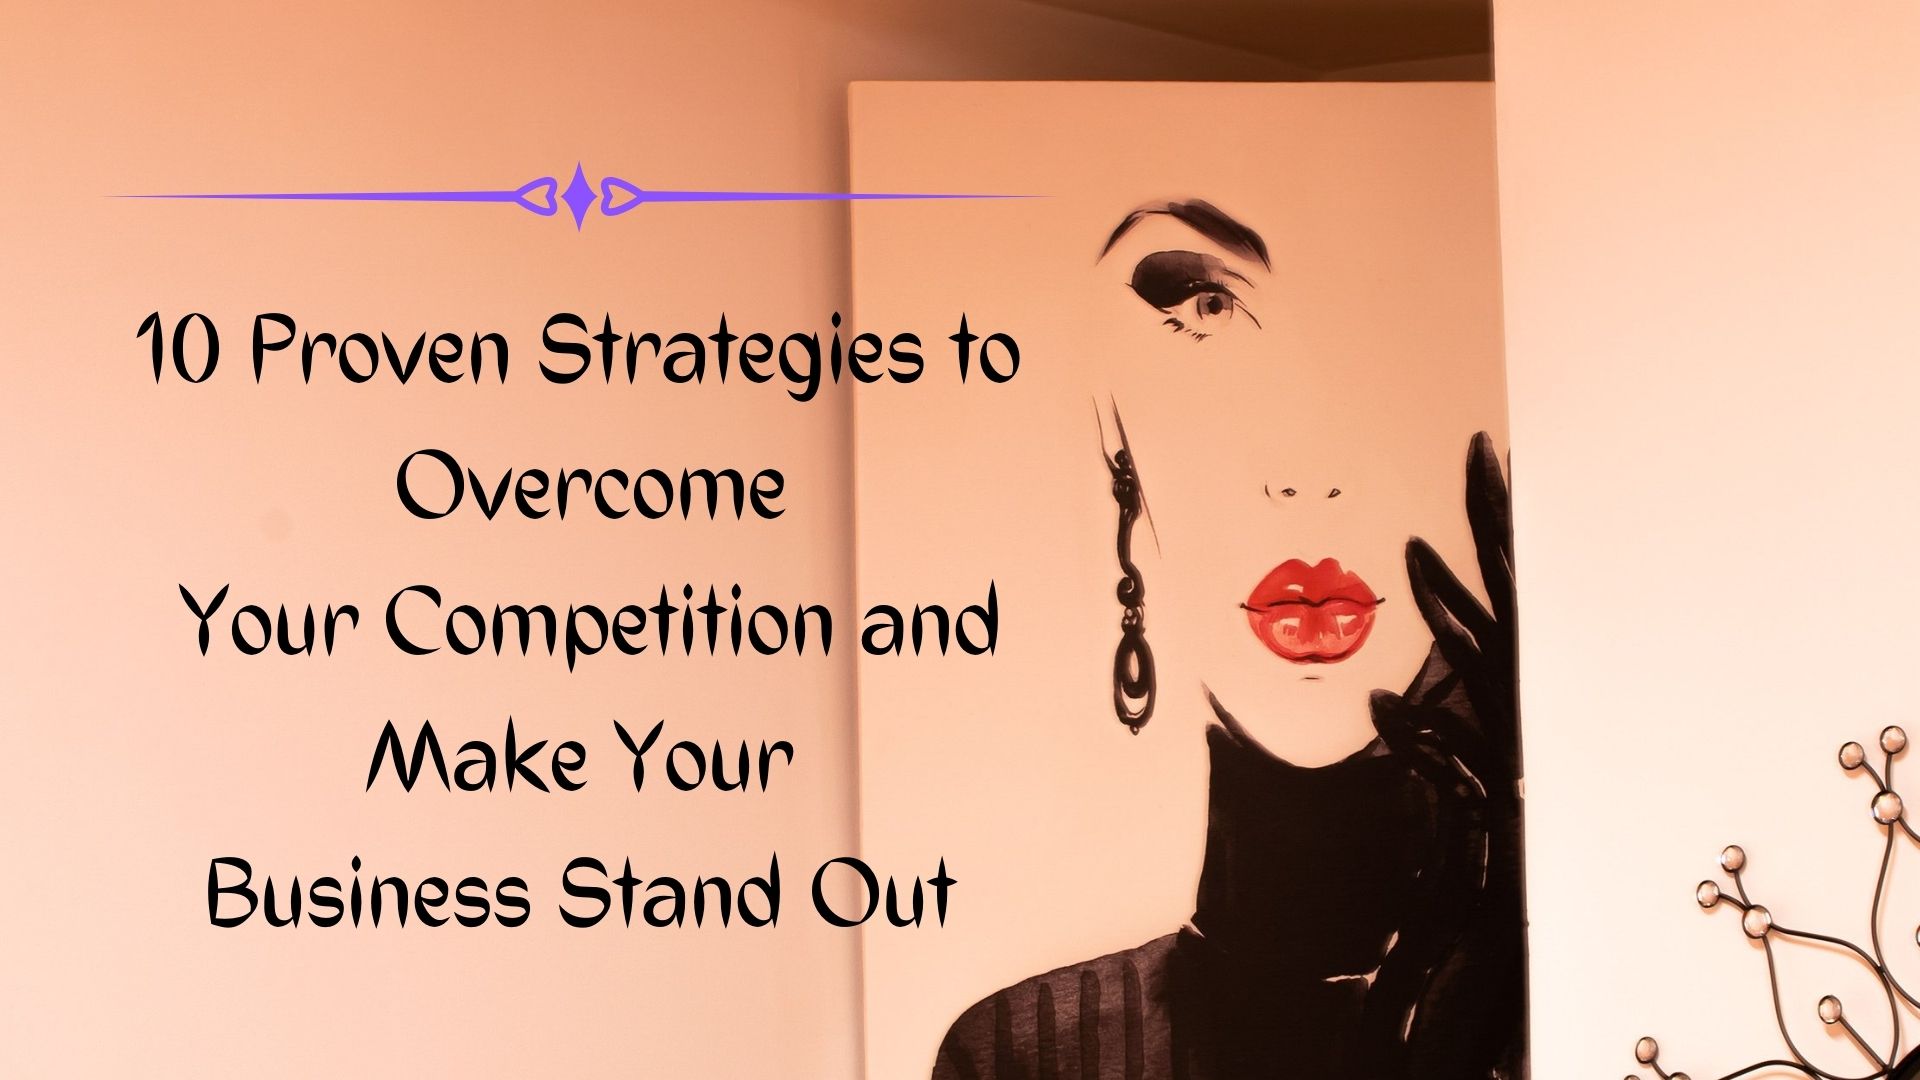 How Can You Stand Out as a Business? – 10 Proven Strategies to Get an Edge